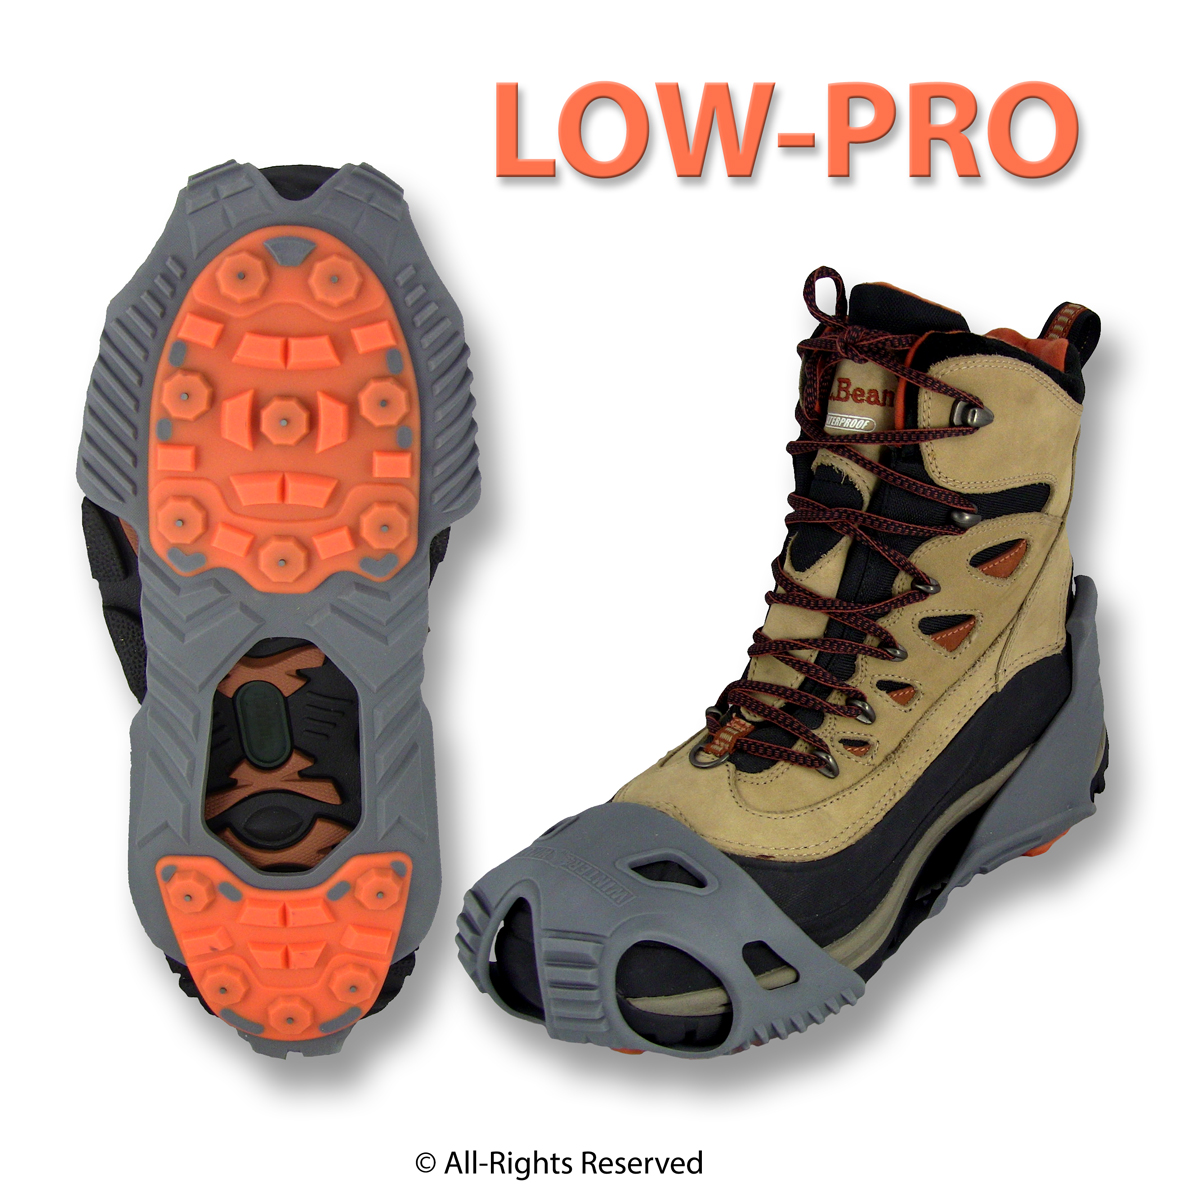 Winter Walking LOW-PRO Ice Cleats for Boots